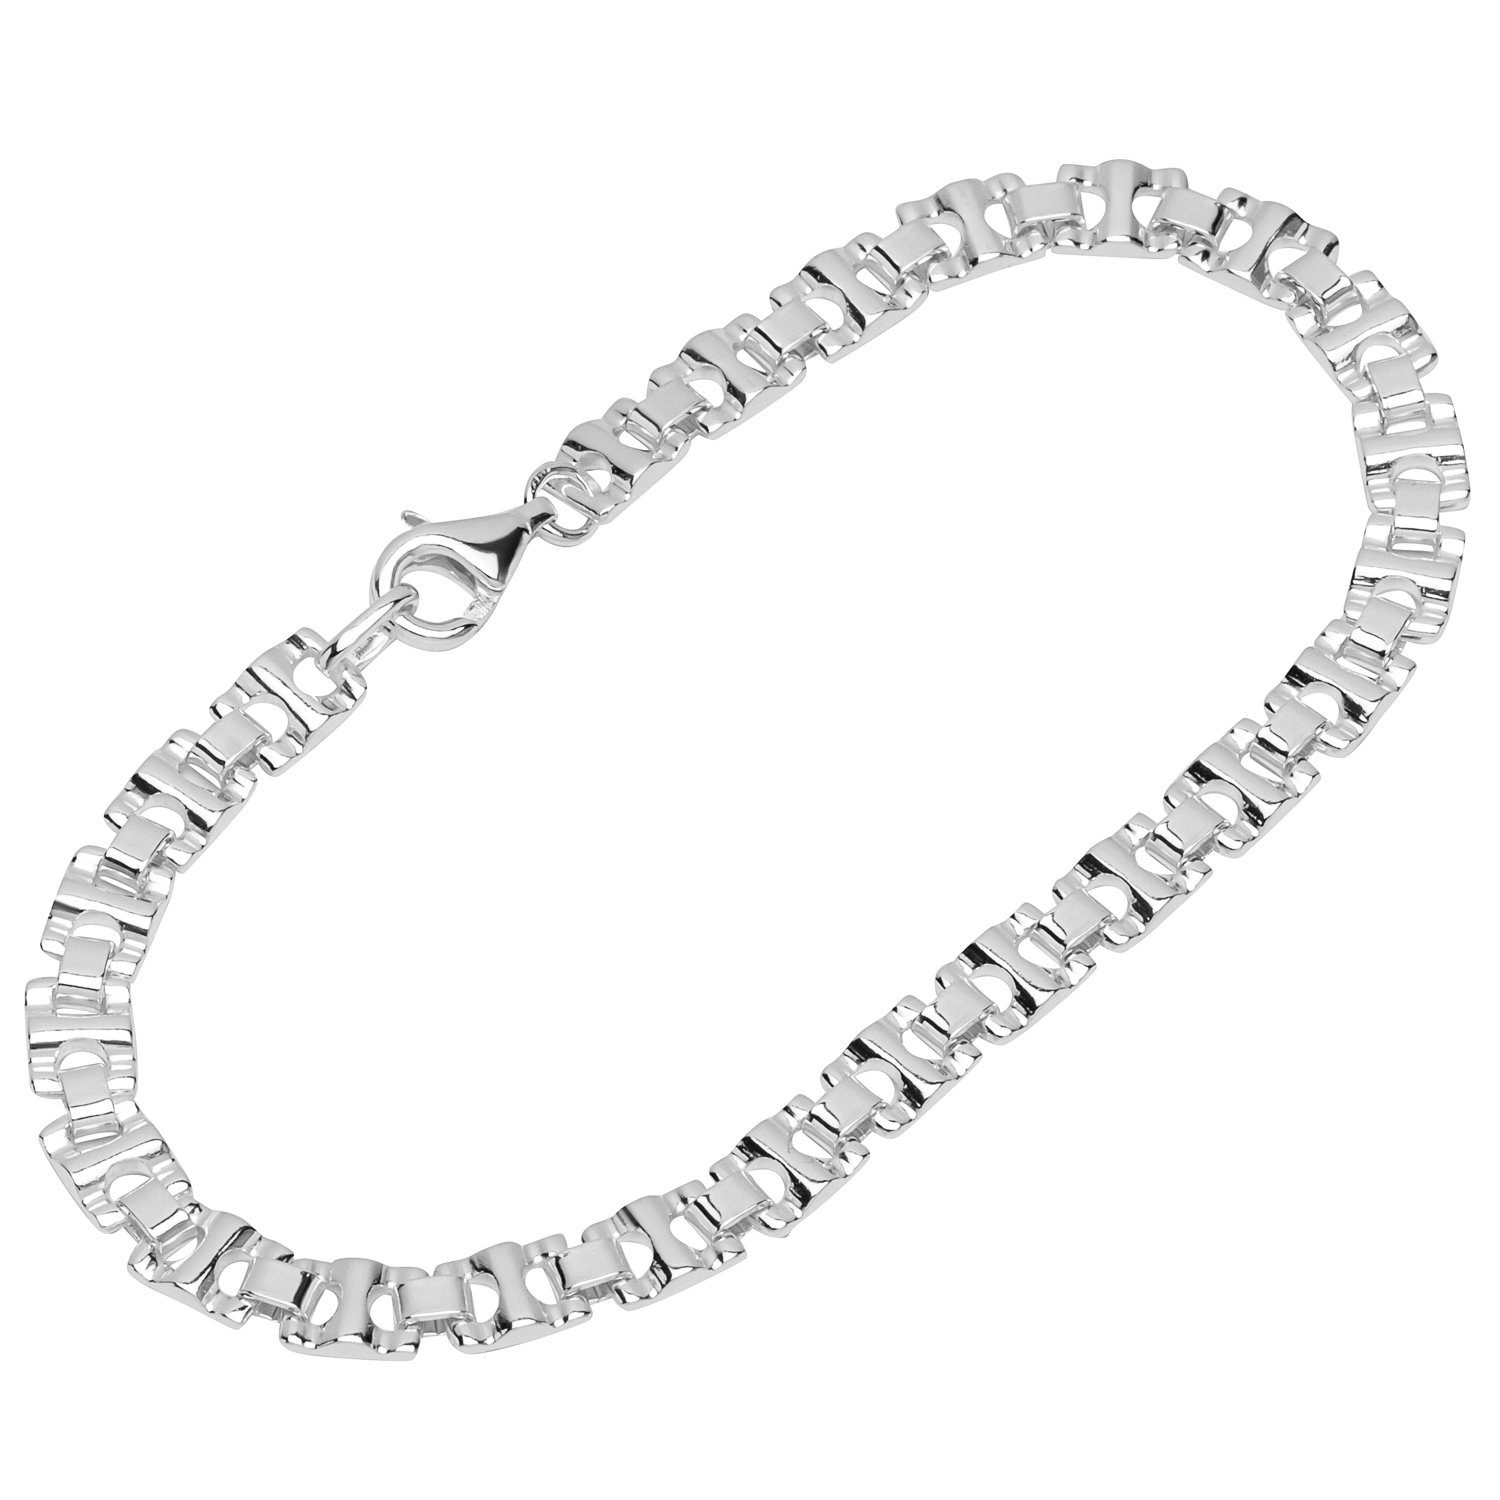 NKlaus Silberarmband Armband 925 Sterling Silber 20cm Calla Kette Unise (1 Stück), Made in Germany